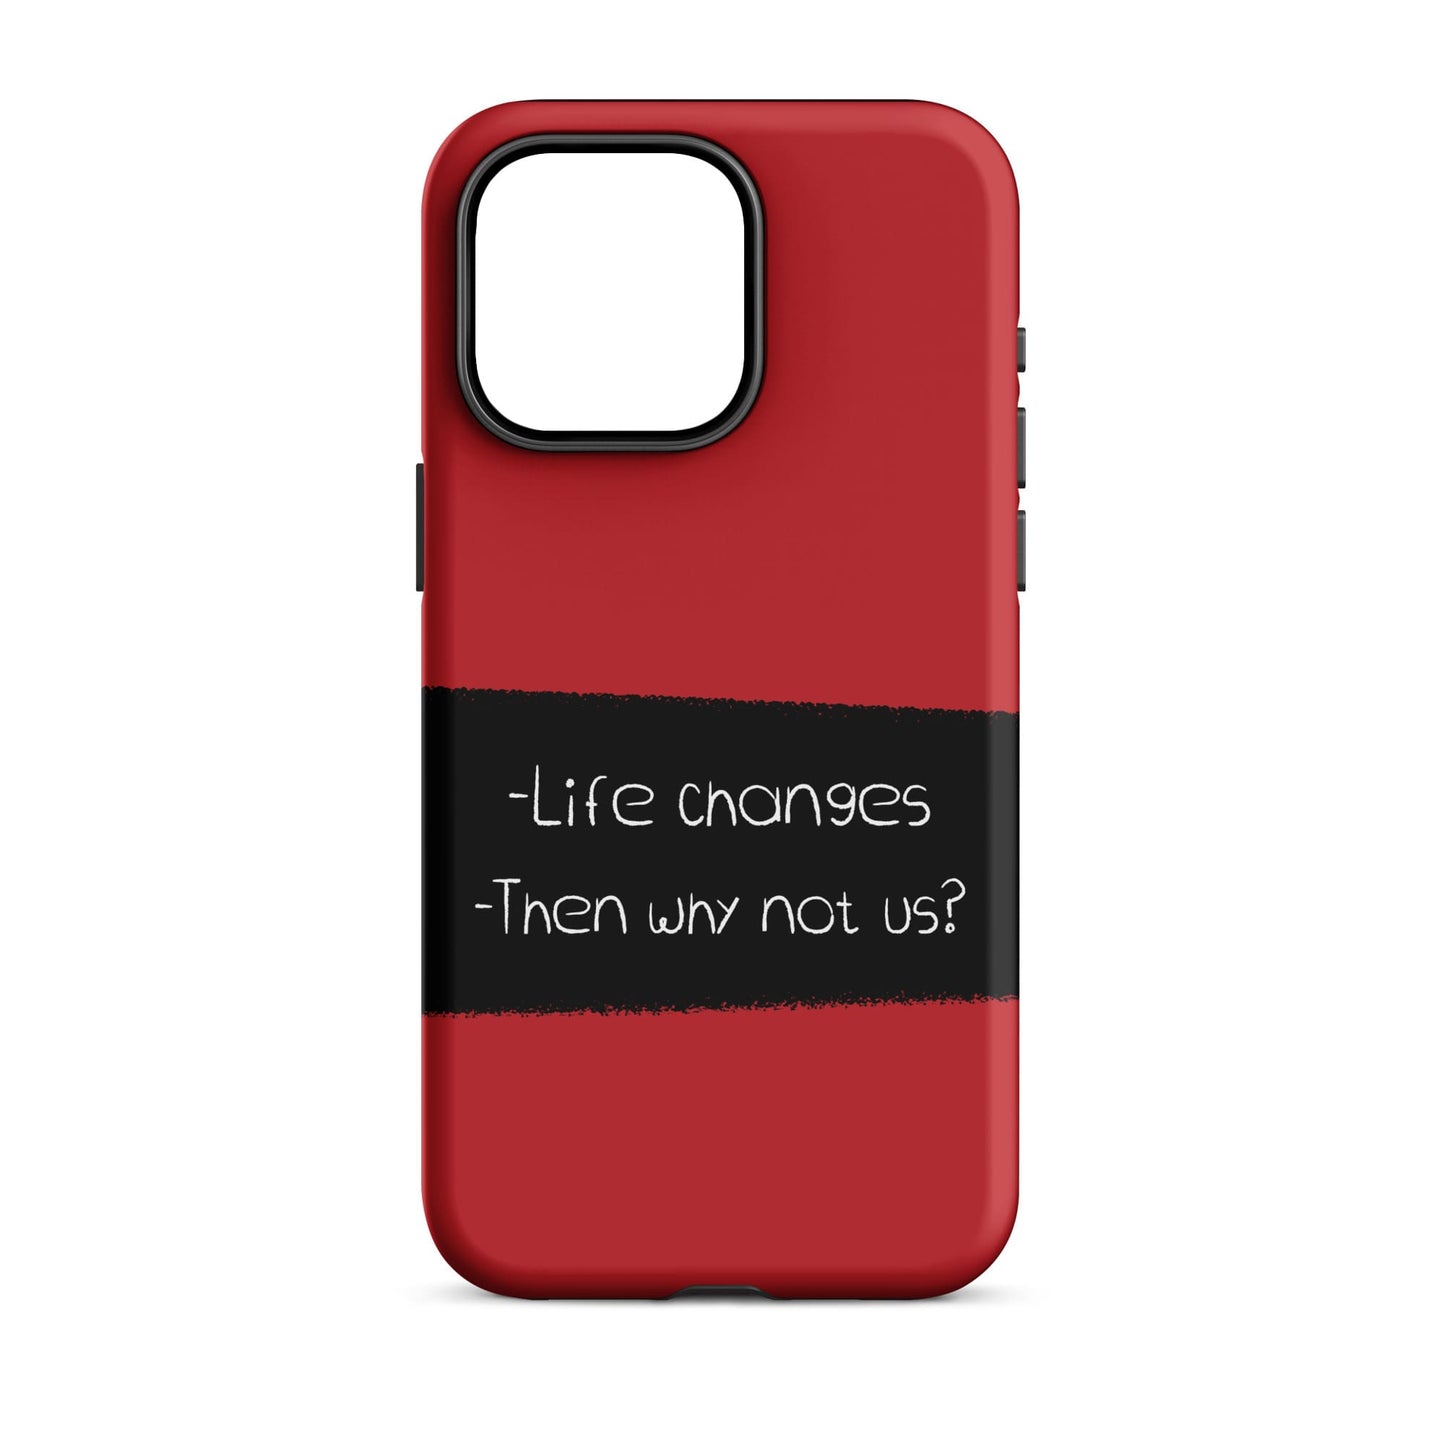 Life Changes - (Red) Quoted iPhone Case